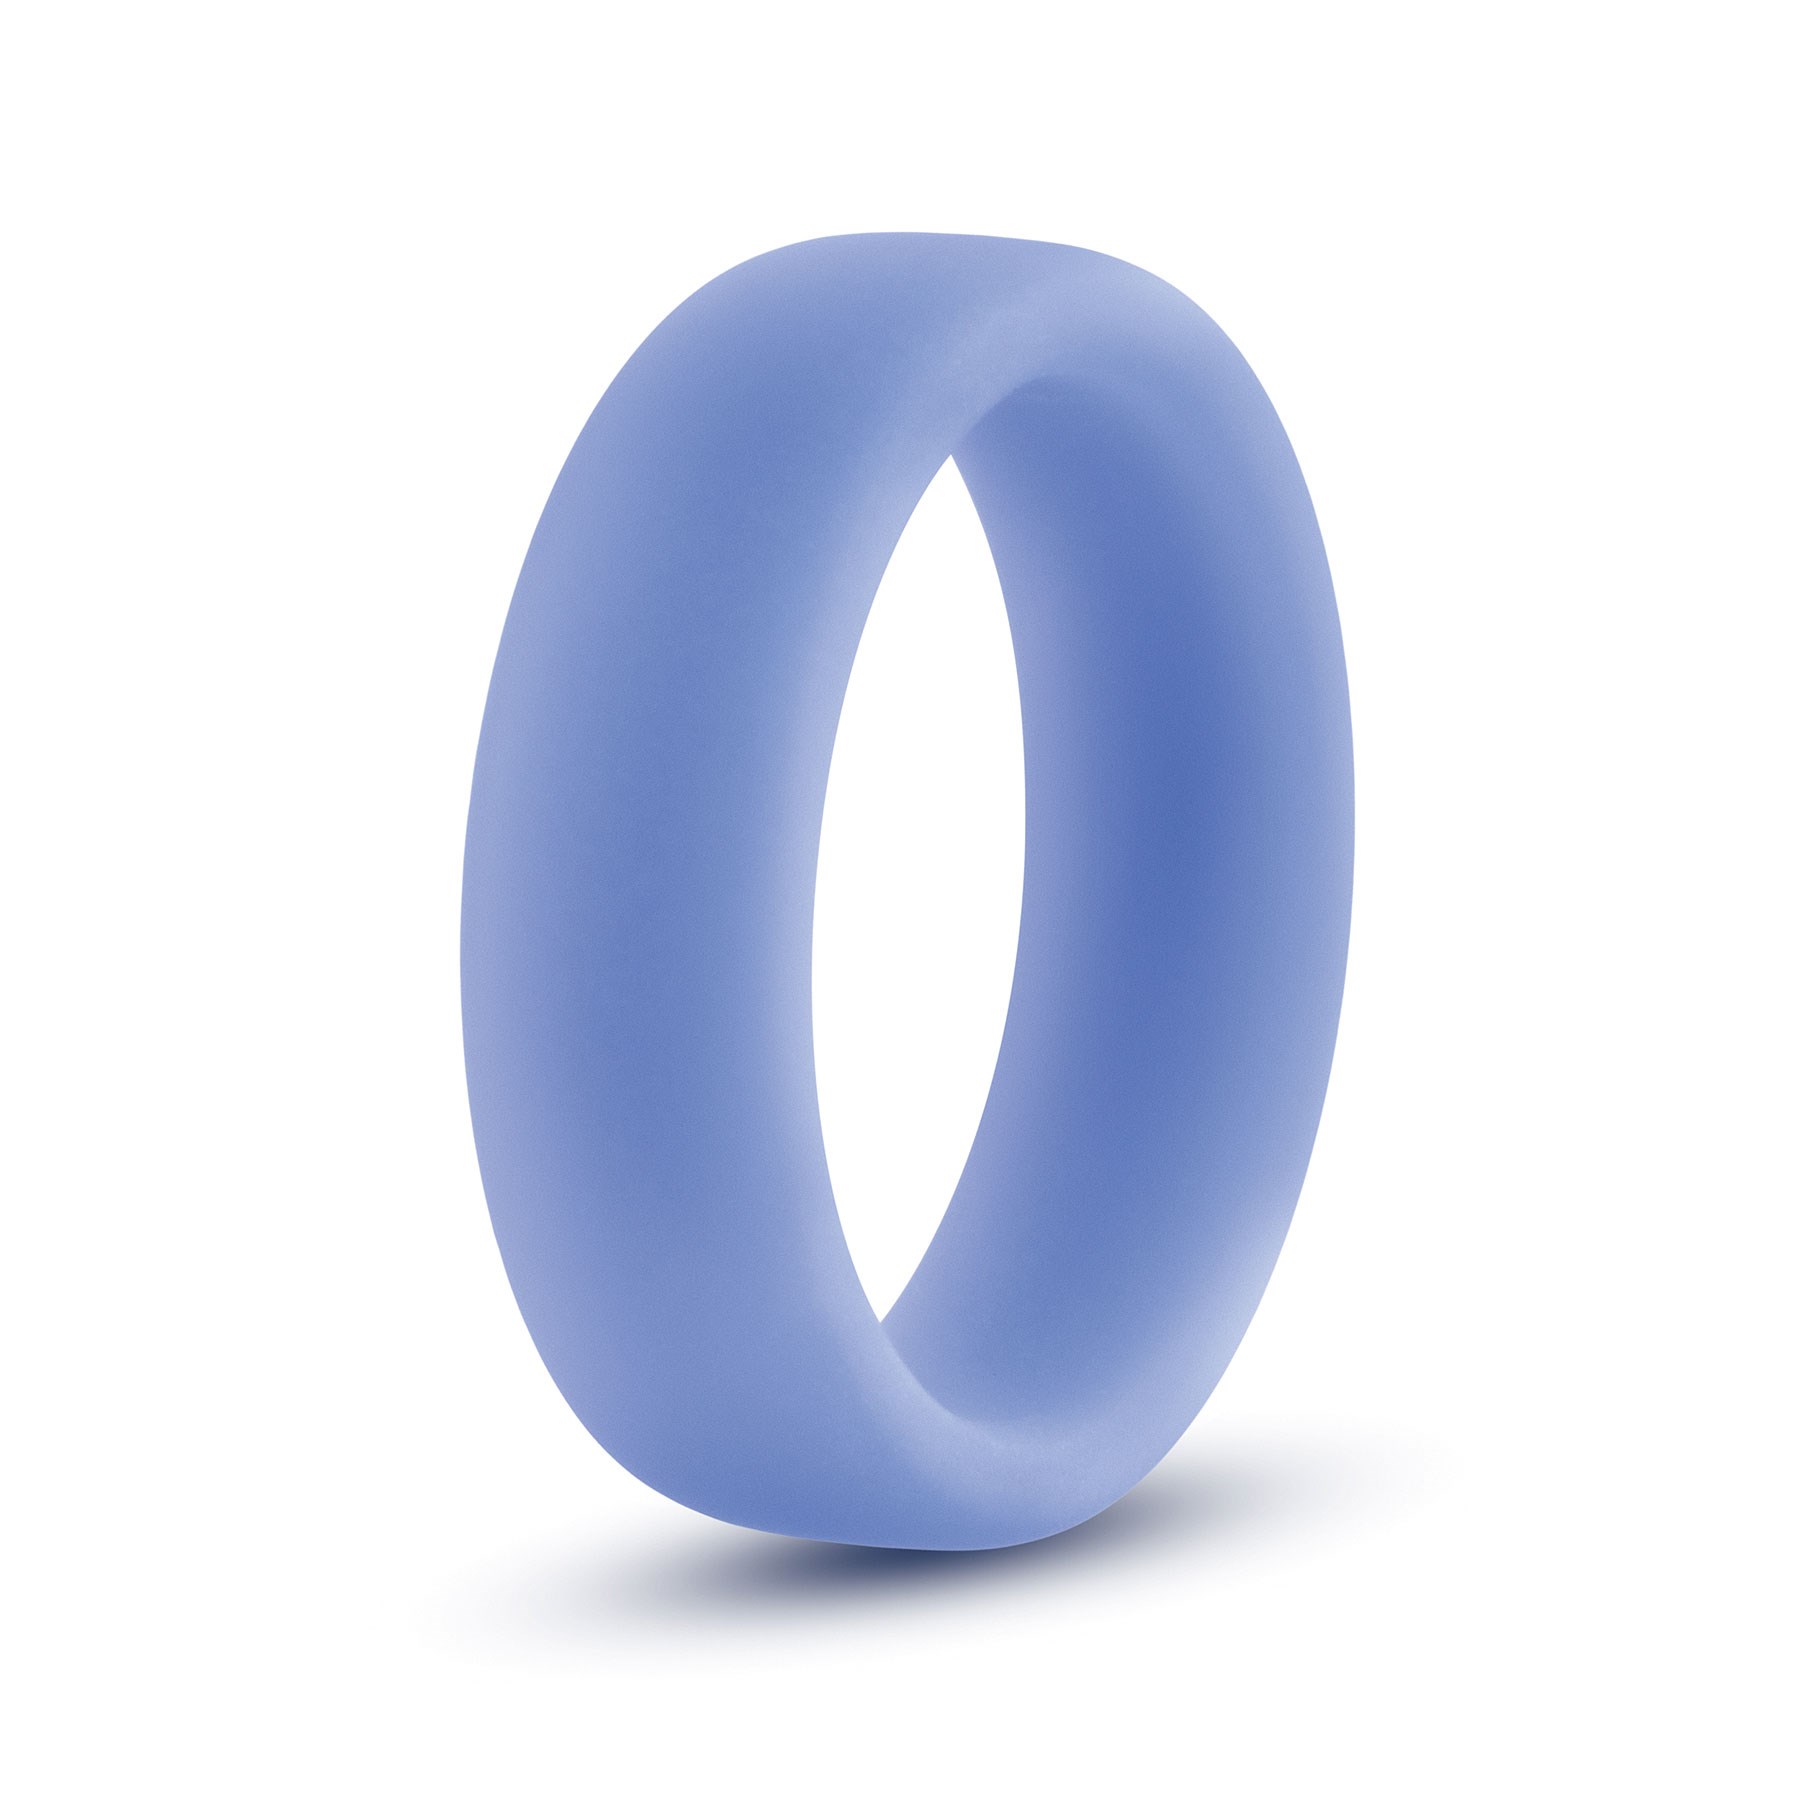 Performance Silicone Glo Cock Ring purple